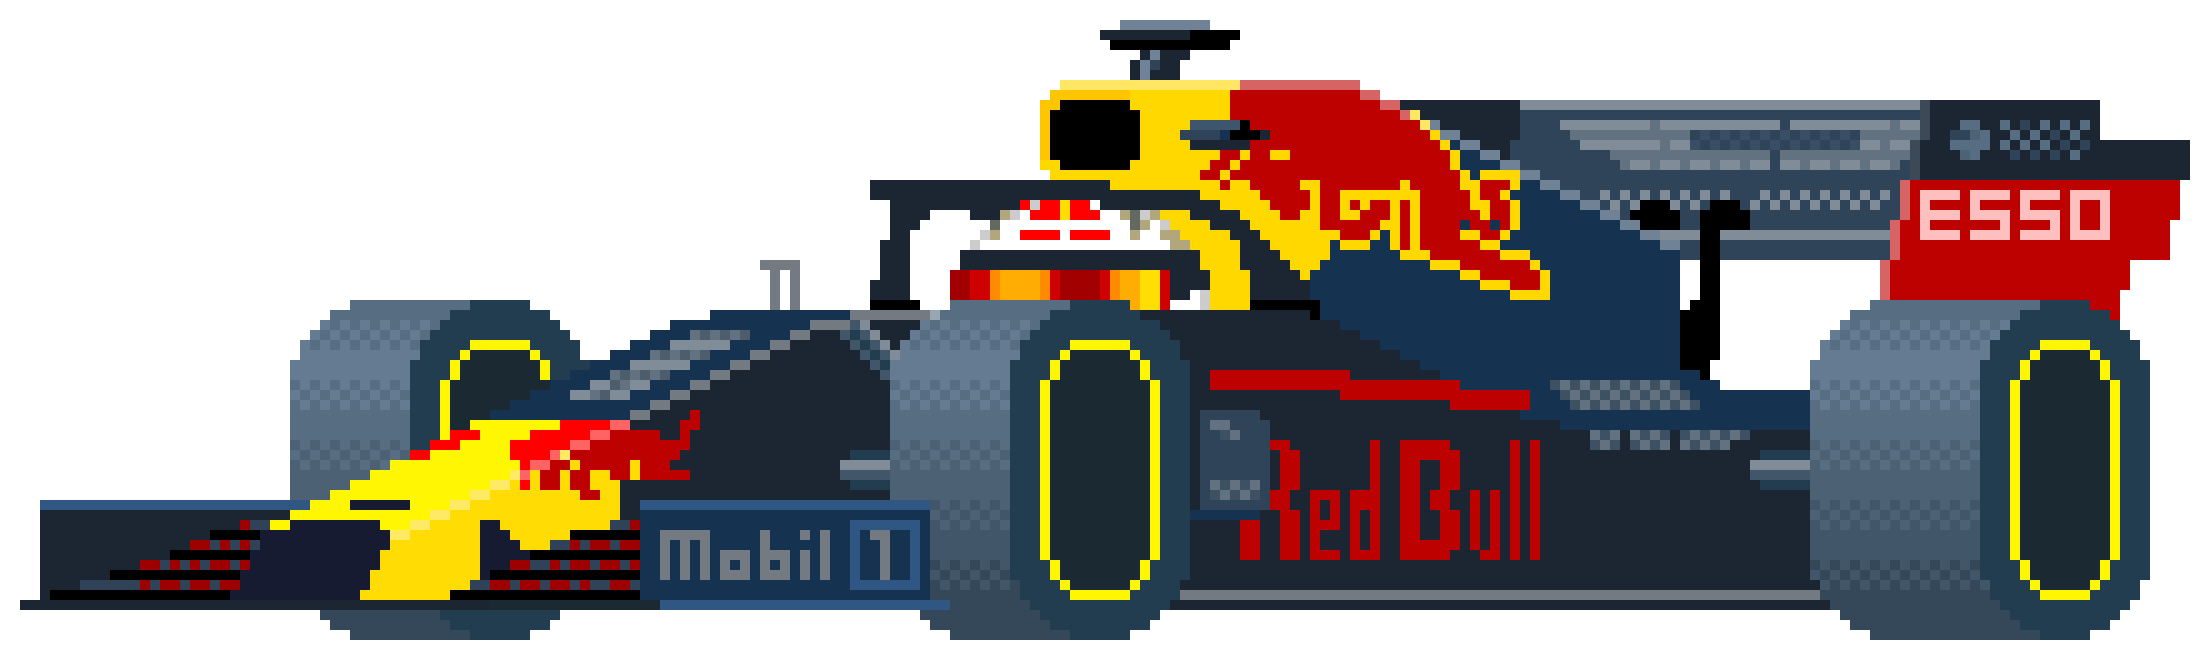 rb16-FINAL1000pc.png